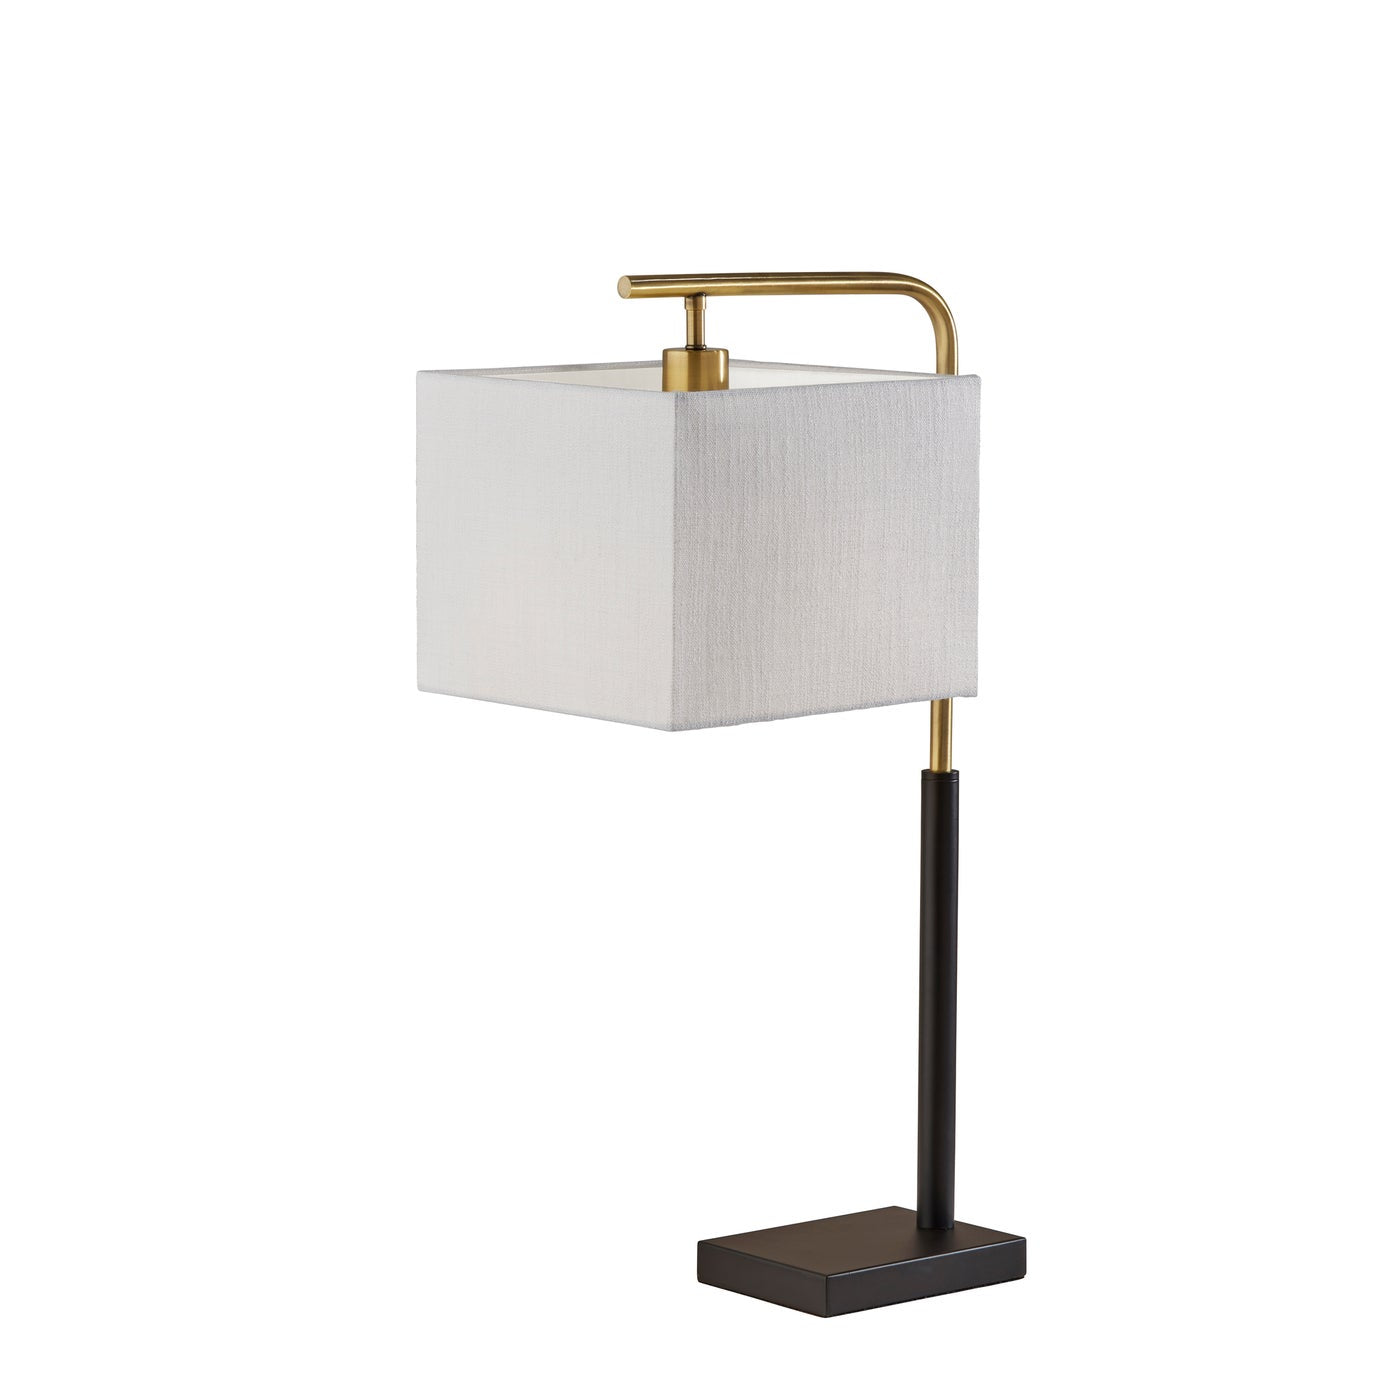 Adesso Home - 4182-21 - Table Lamp - Flora - Black & Antique Brass